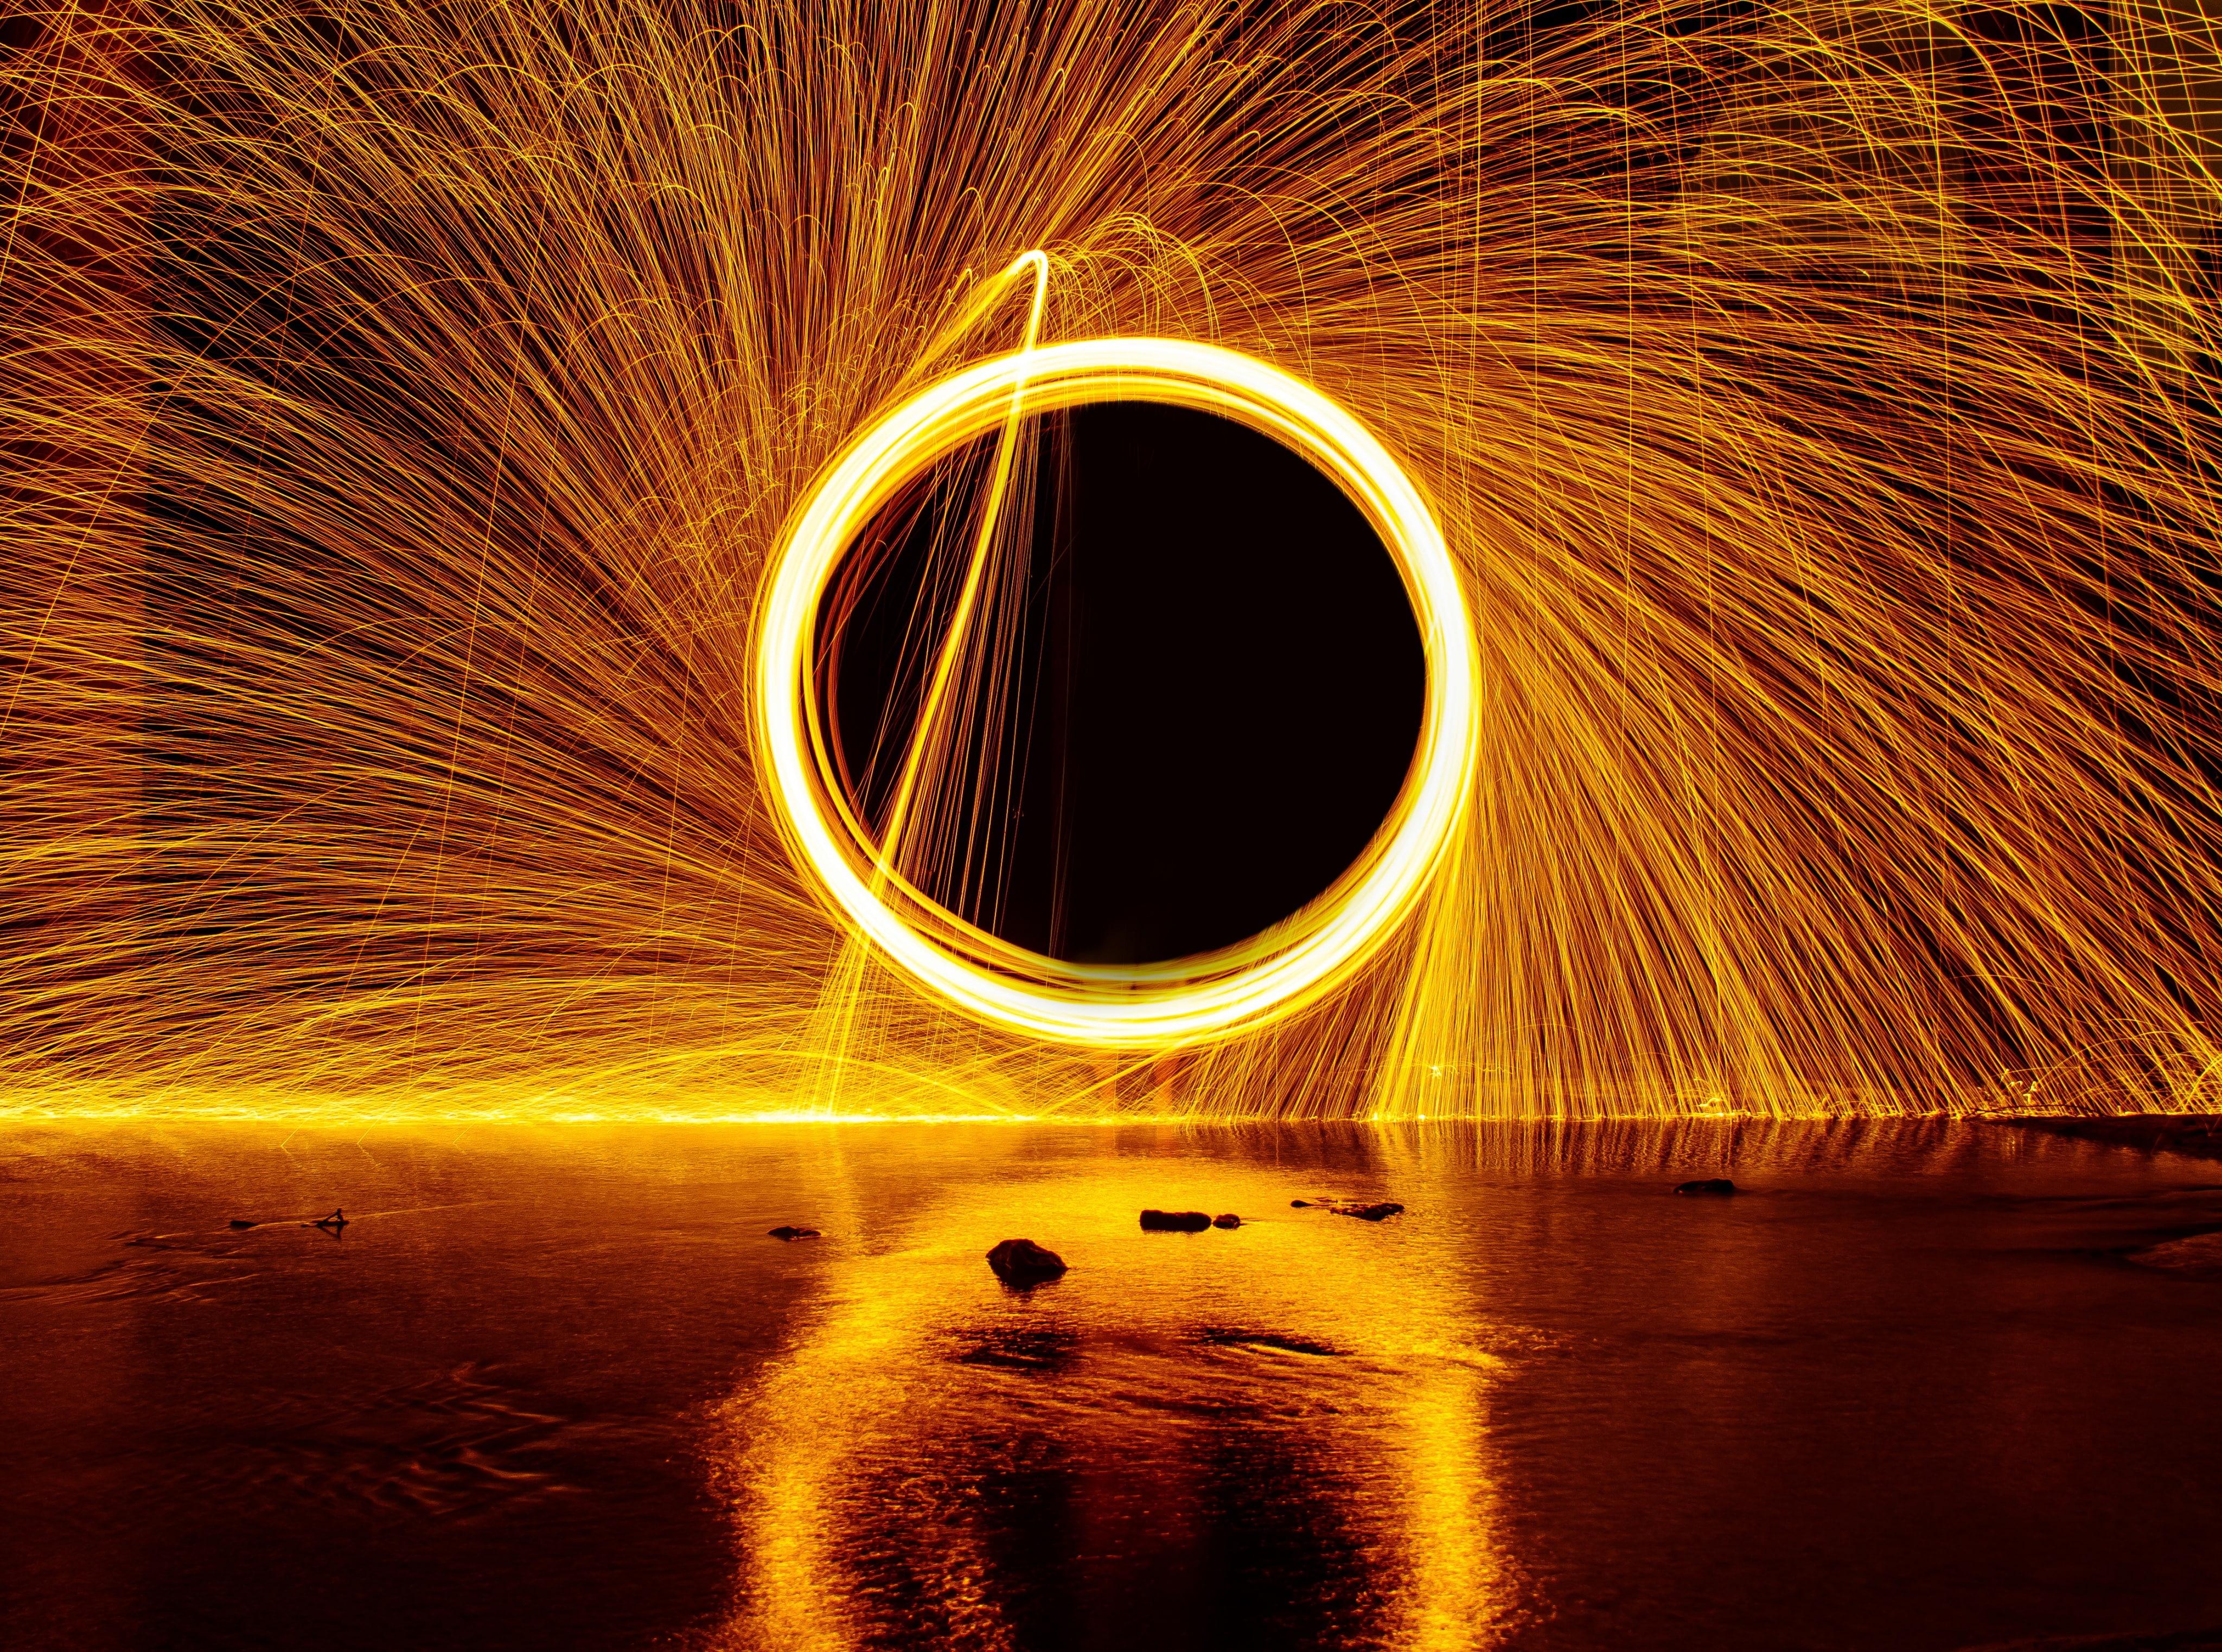 HD wallpaper: person taking photo of round steel wool, spark